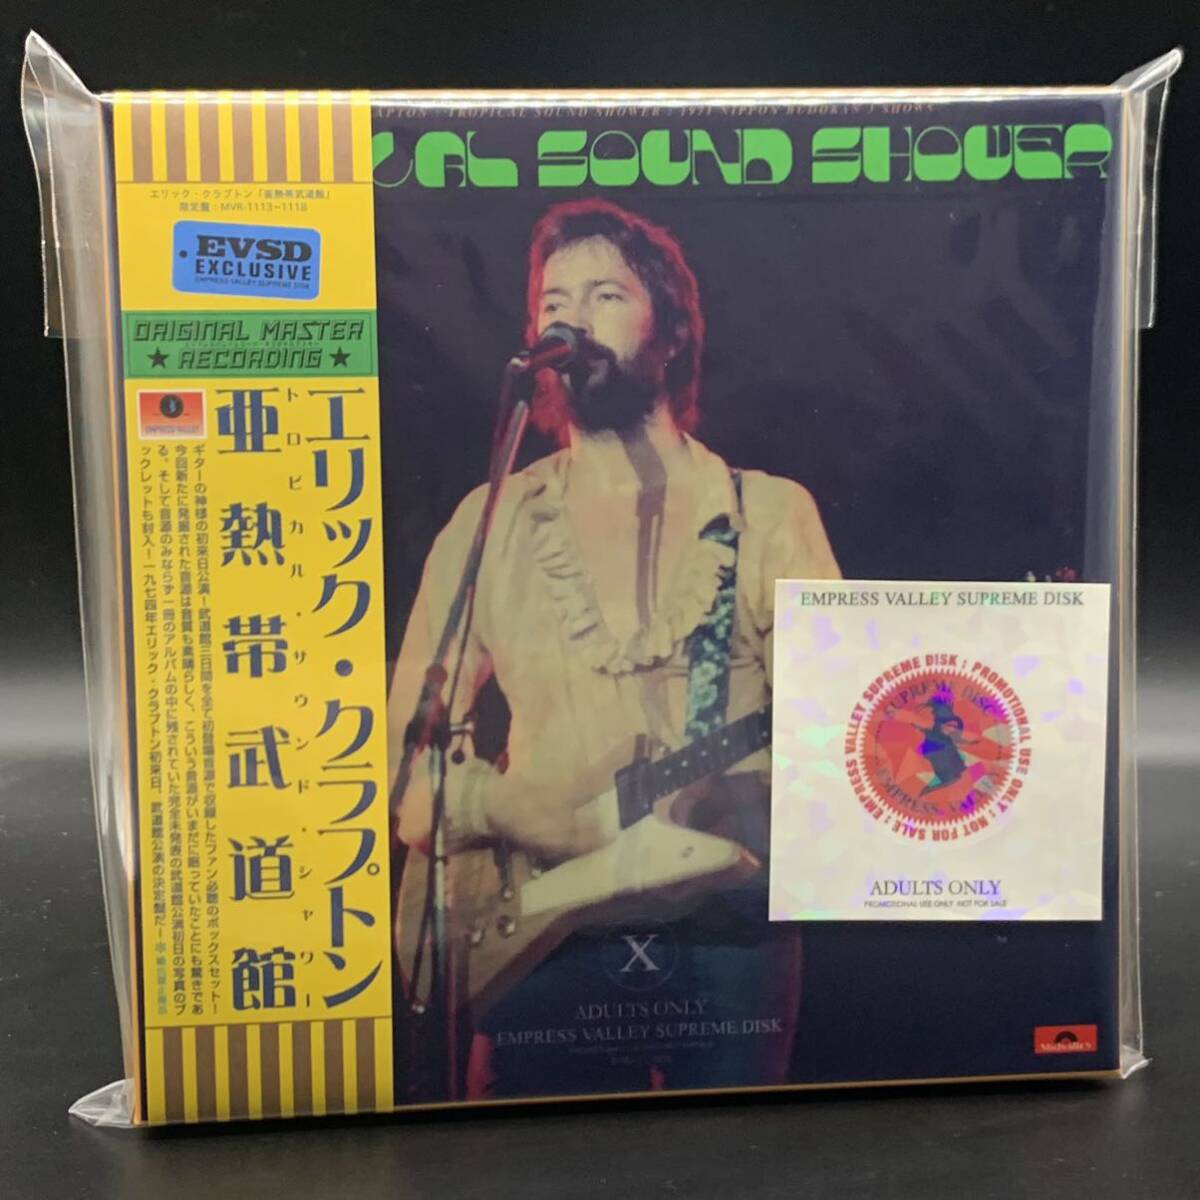 ERIC CLAPTON / TROPICAL SOUND SHOWER「亜熱帯武道館」(6CD BOX with Booklet) 初来日武道館3公演を全て初登場音源で収録の凄いやつ！残少の画像1